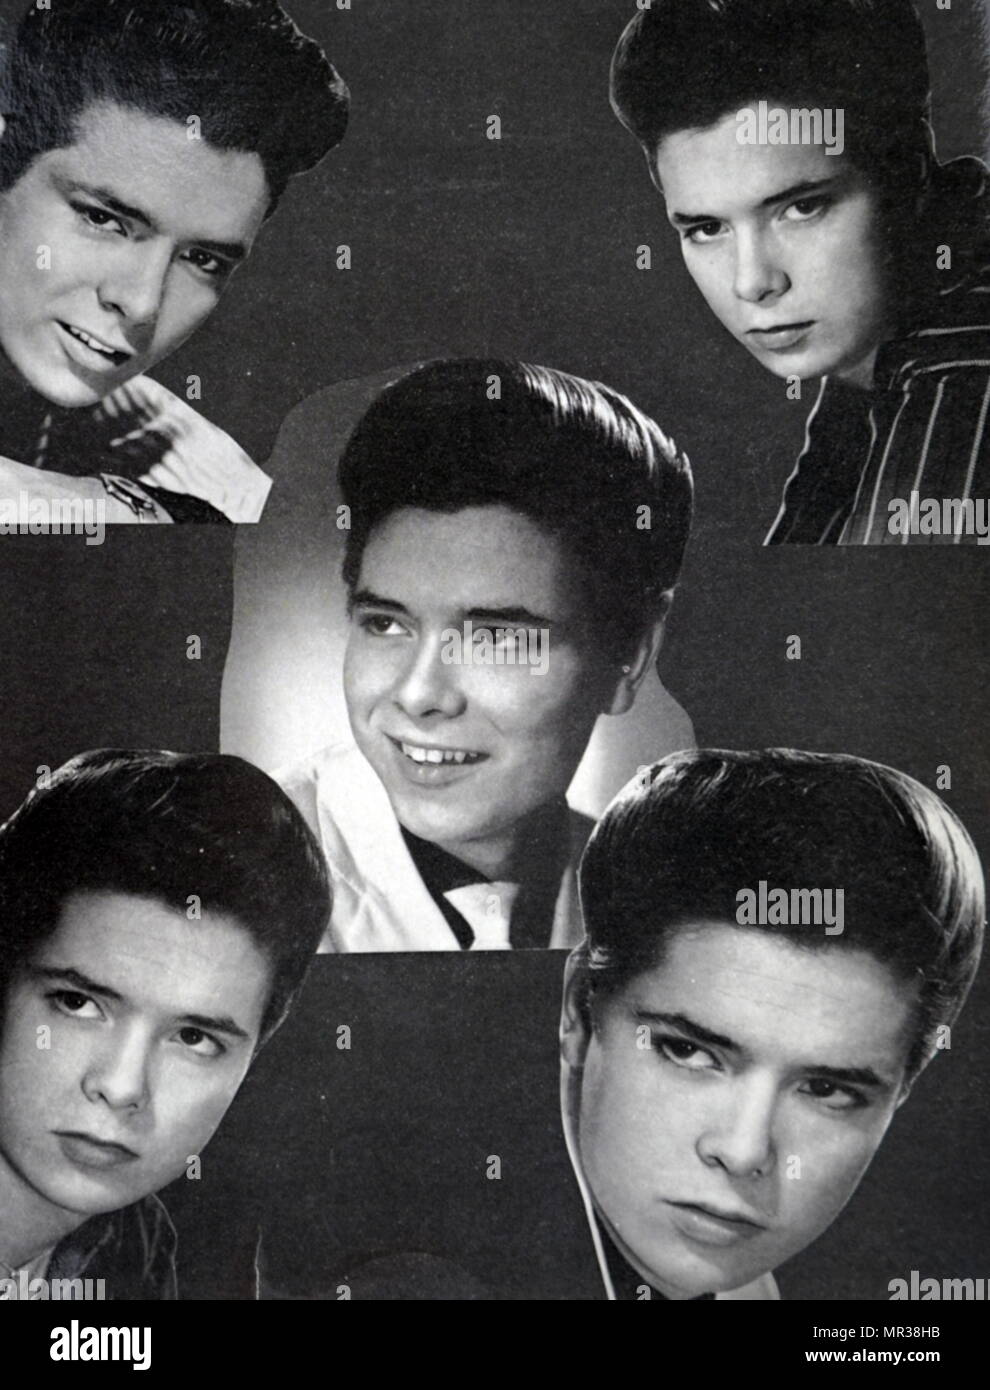 Photographs of Cliff Richard as young man. Cliff Richard (1940-) a British pop singer, musician, performer, actor and philanthropist. Dated 20th century Stock Photo